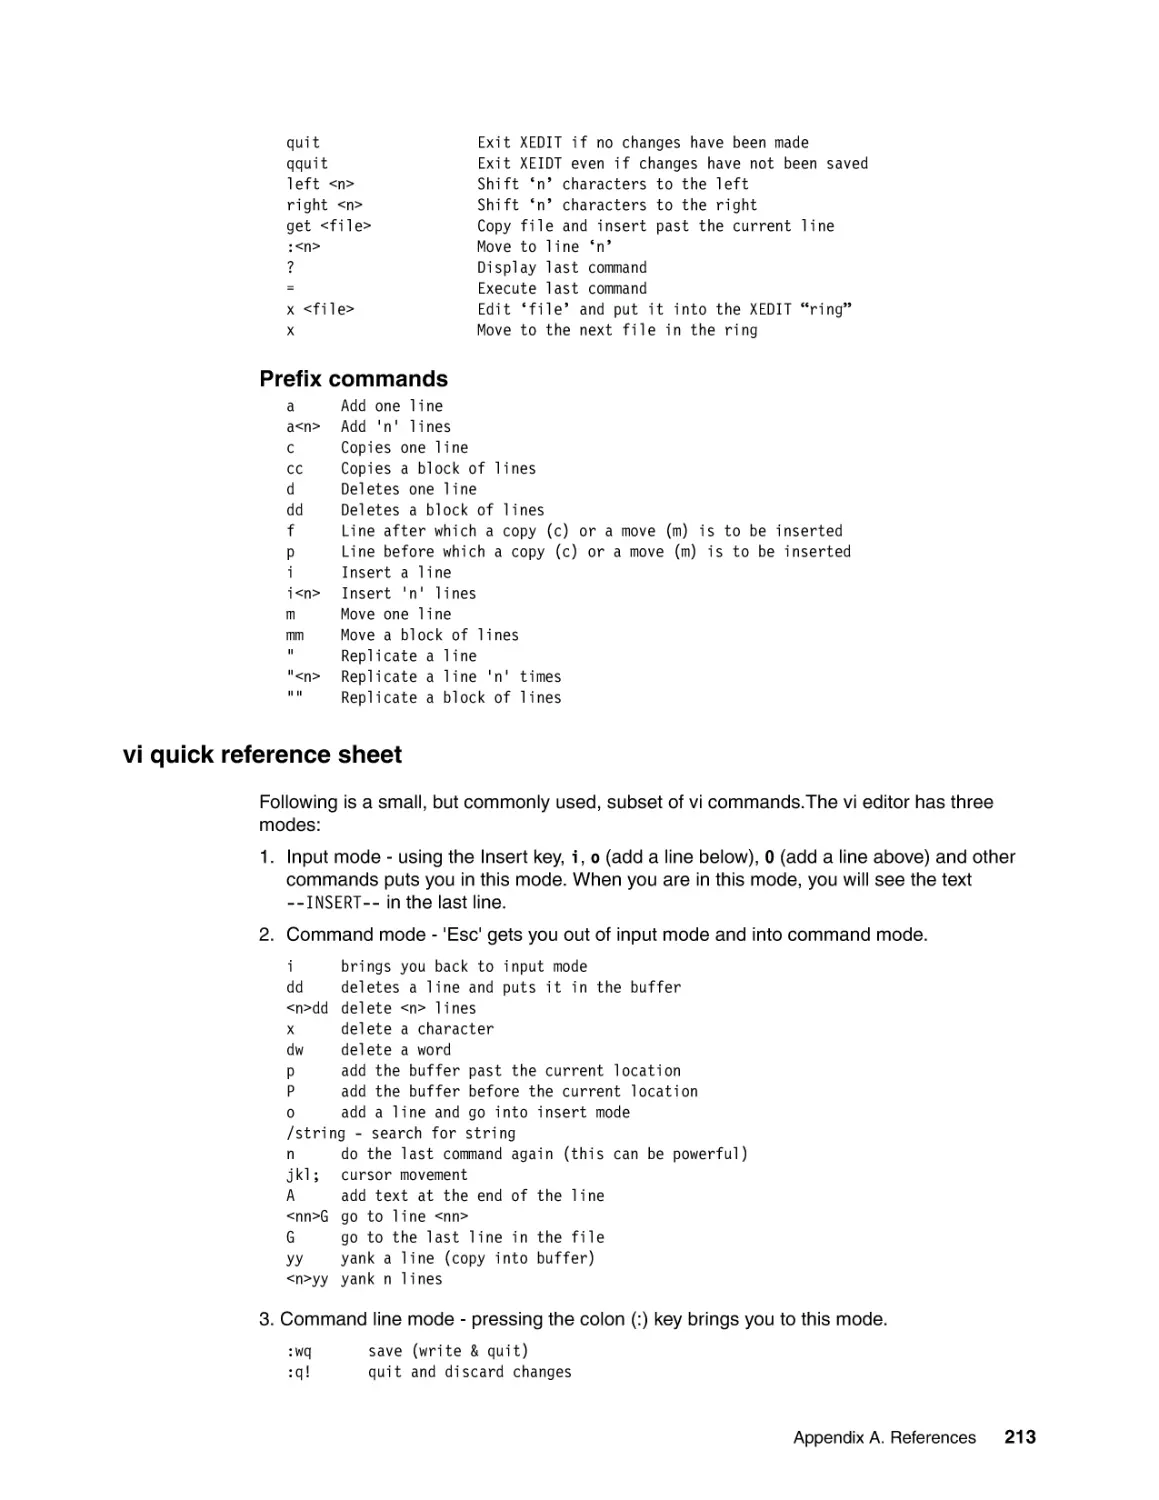 vi quick reference sheet